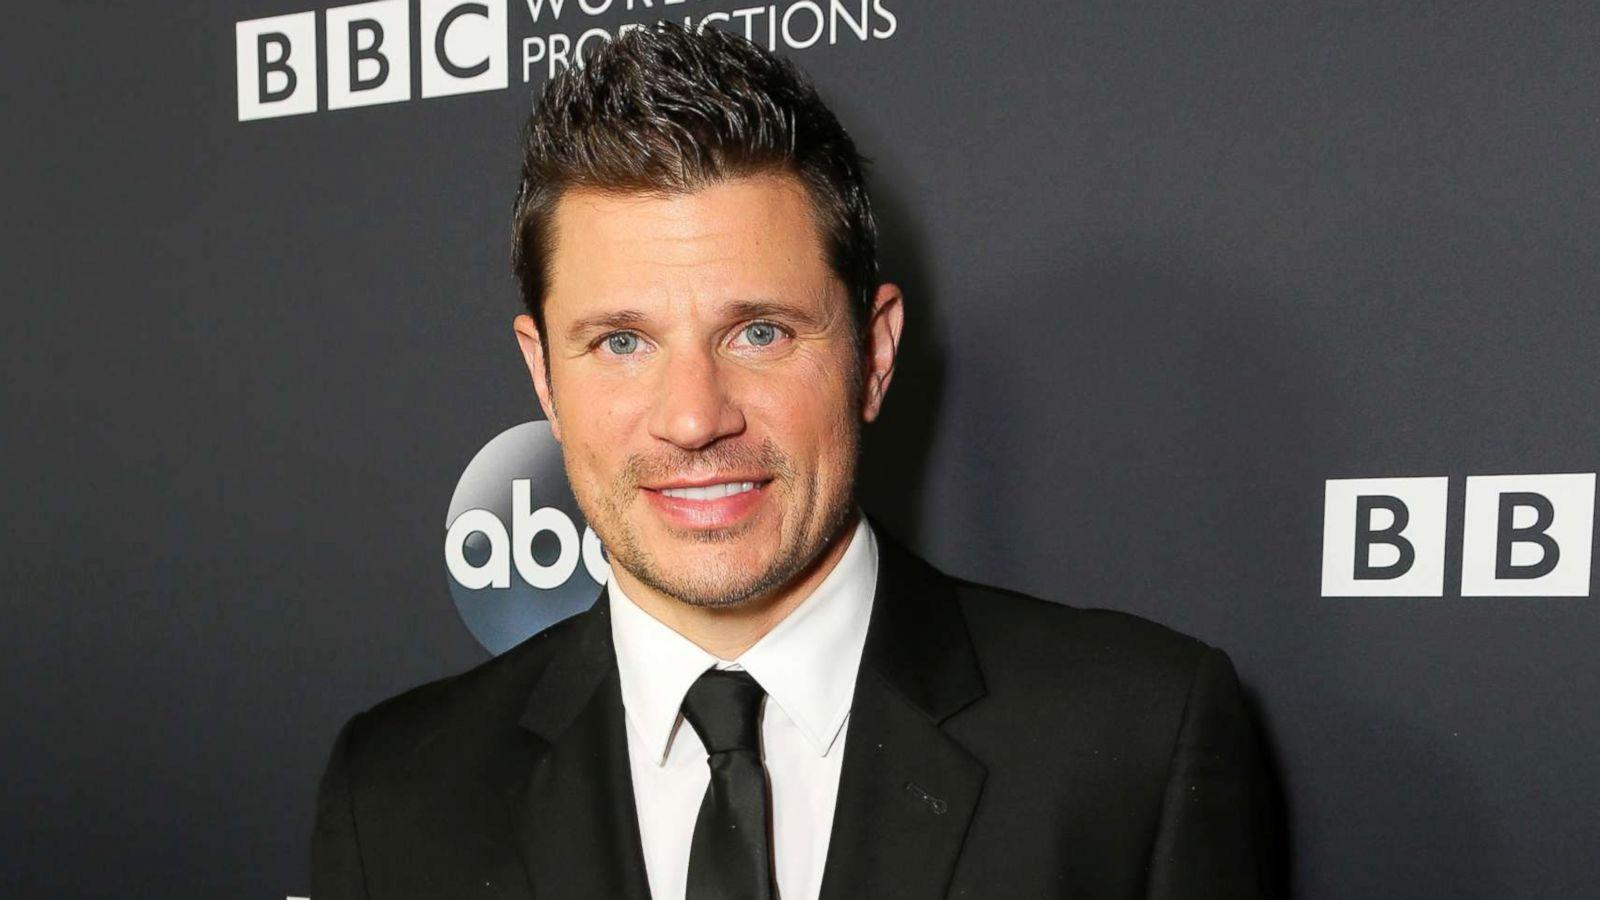 Nick Lachey's employee speaks out after suspect caught in shooting.